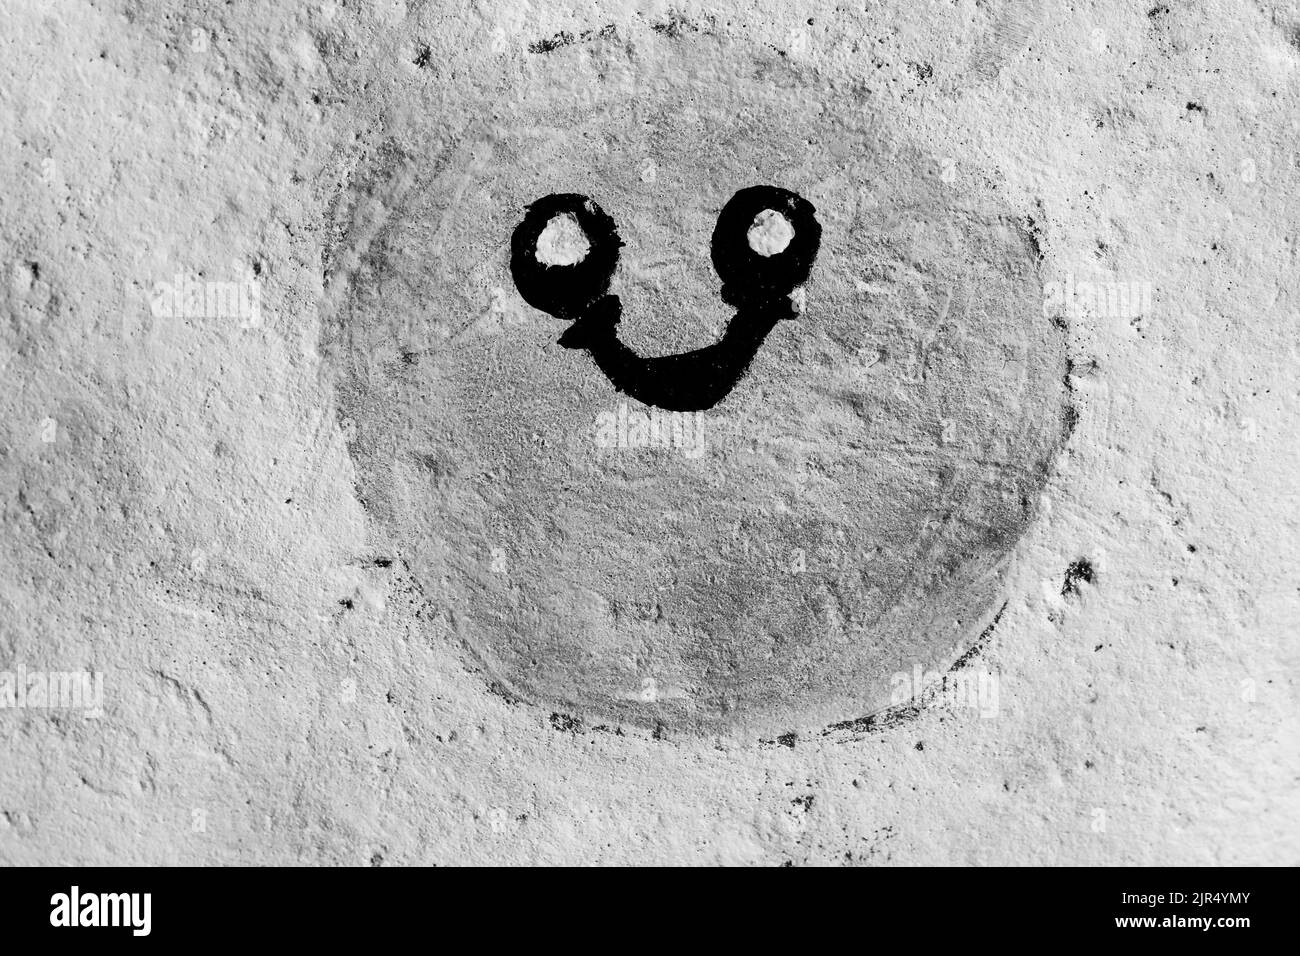 Cute smiley face grinning back at me in black and white monochrome. Stock Photo